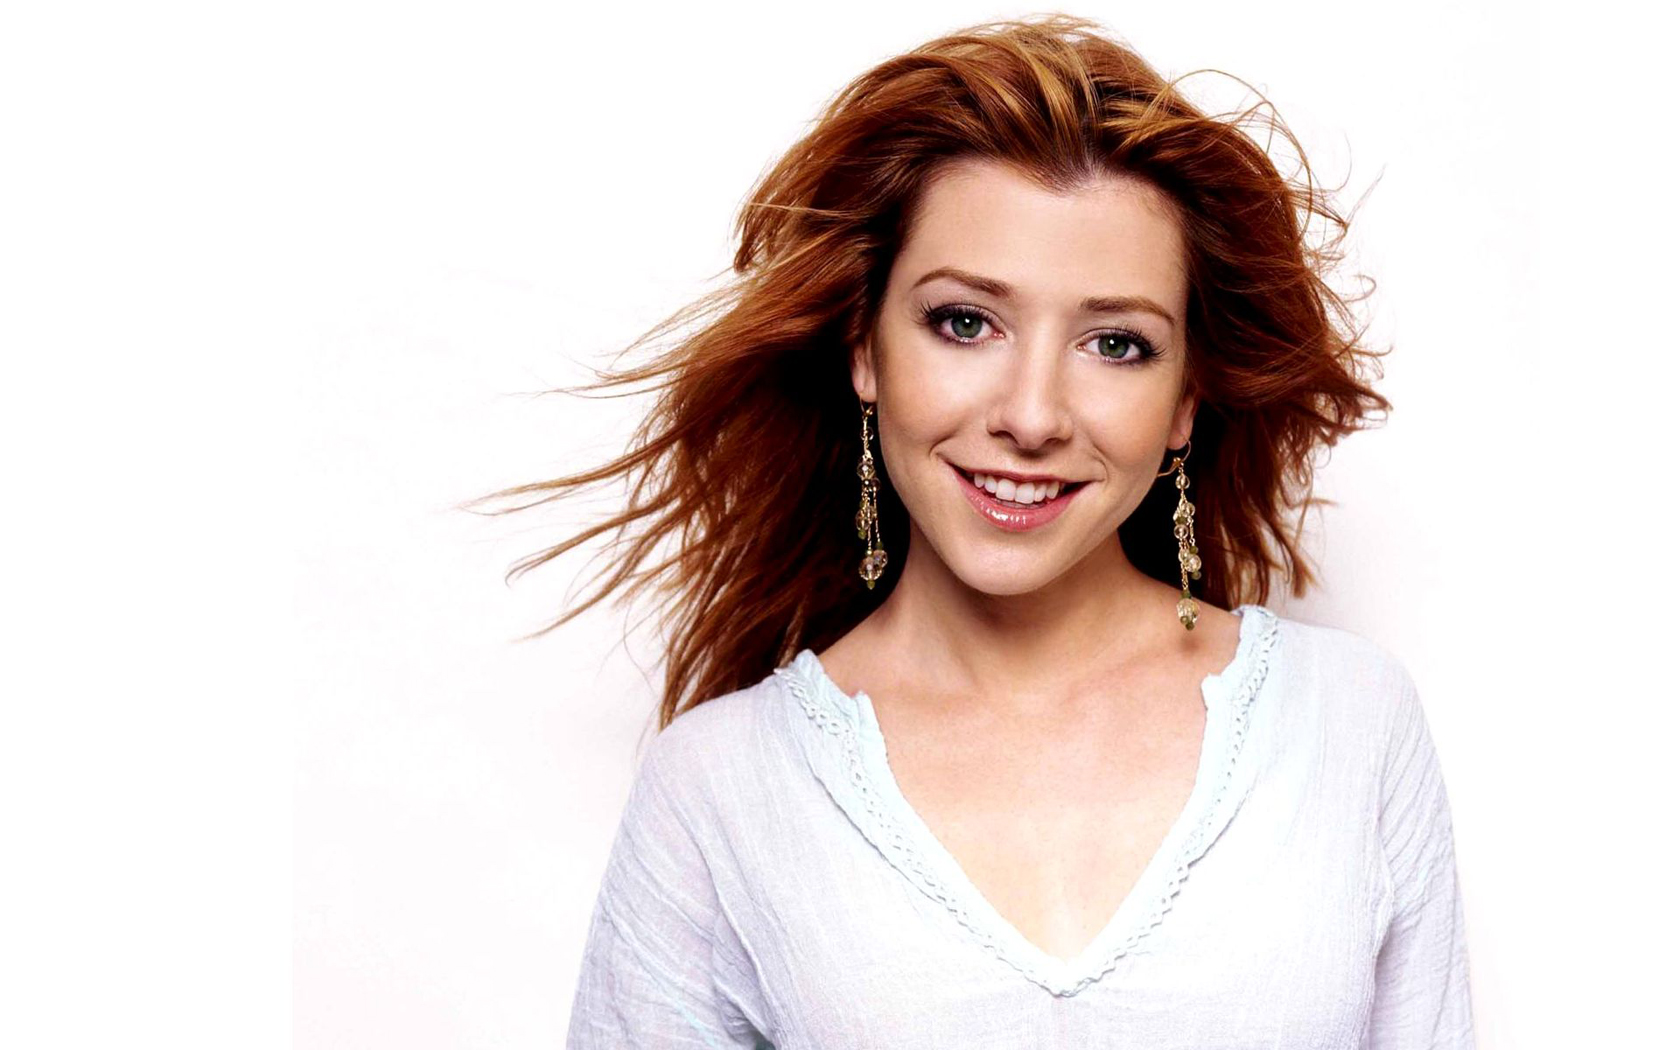 celebrity, alyson hannigan, actress, american, earrings, face, green eyes, redhead, smile